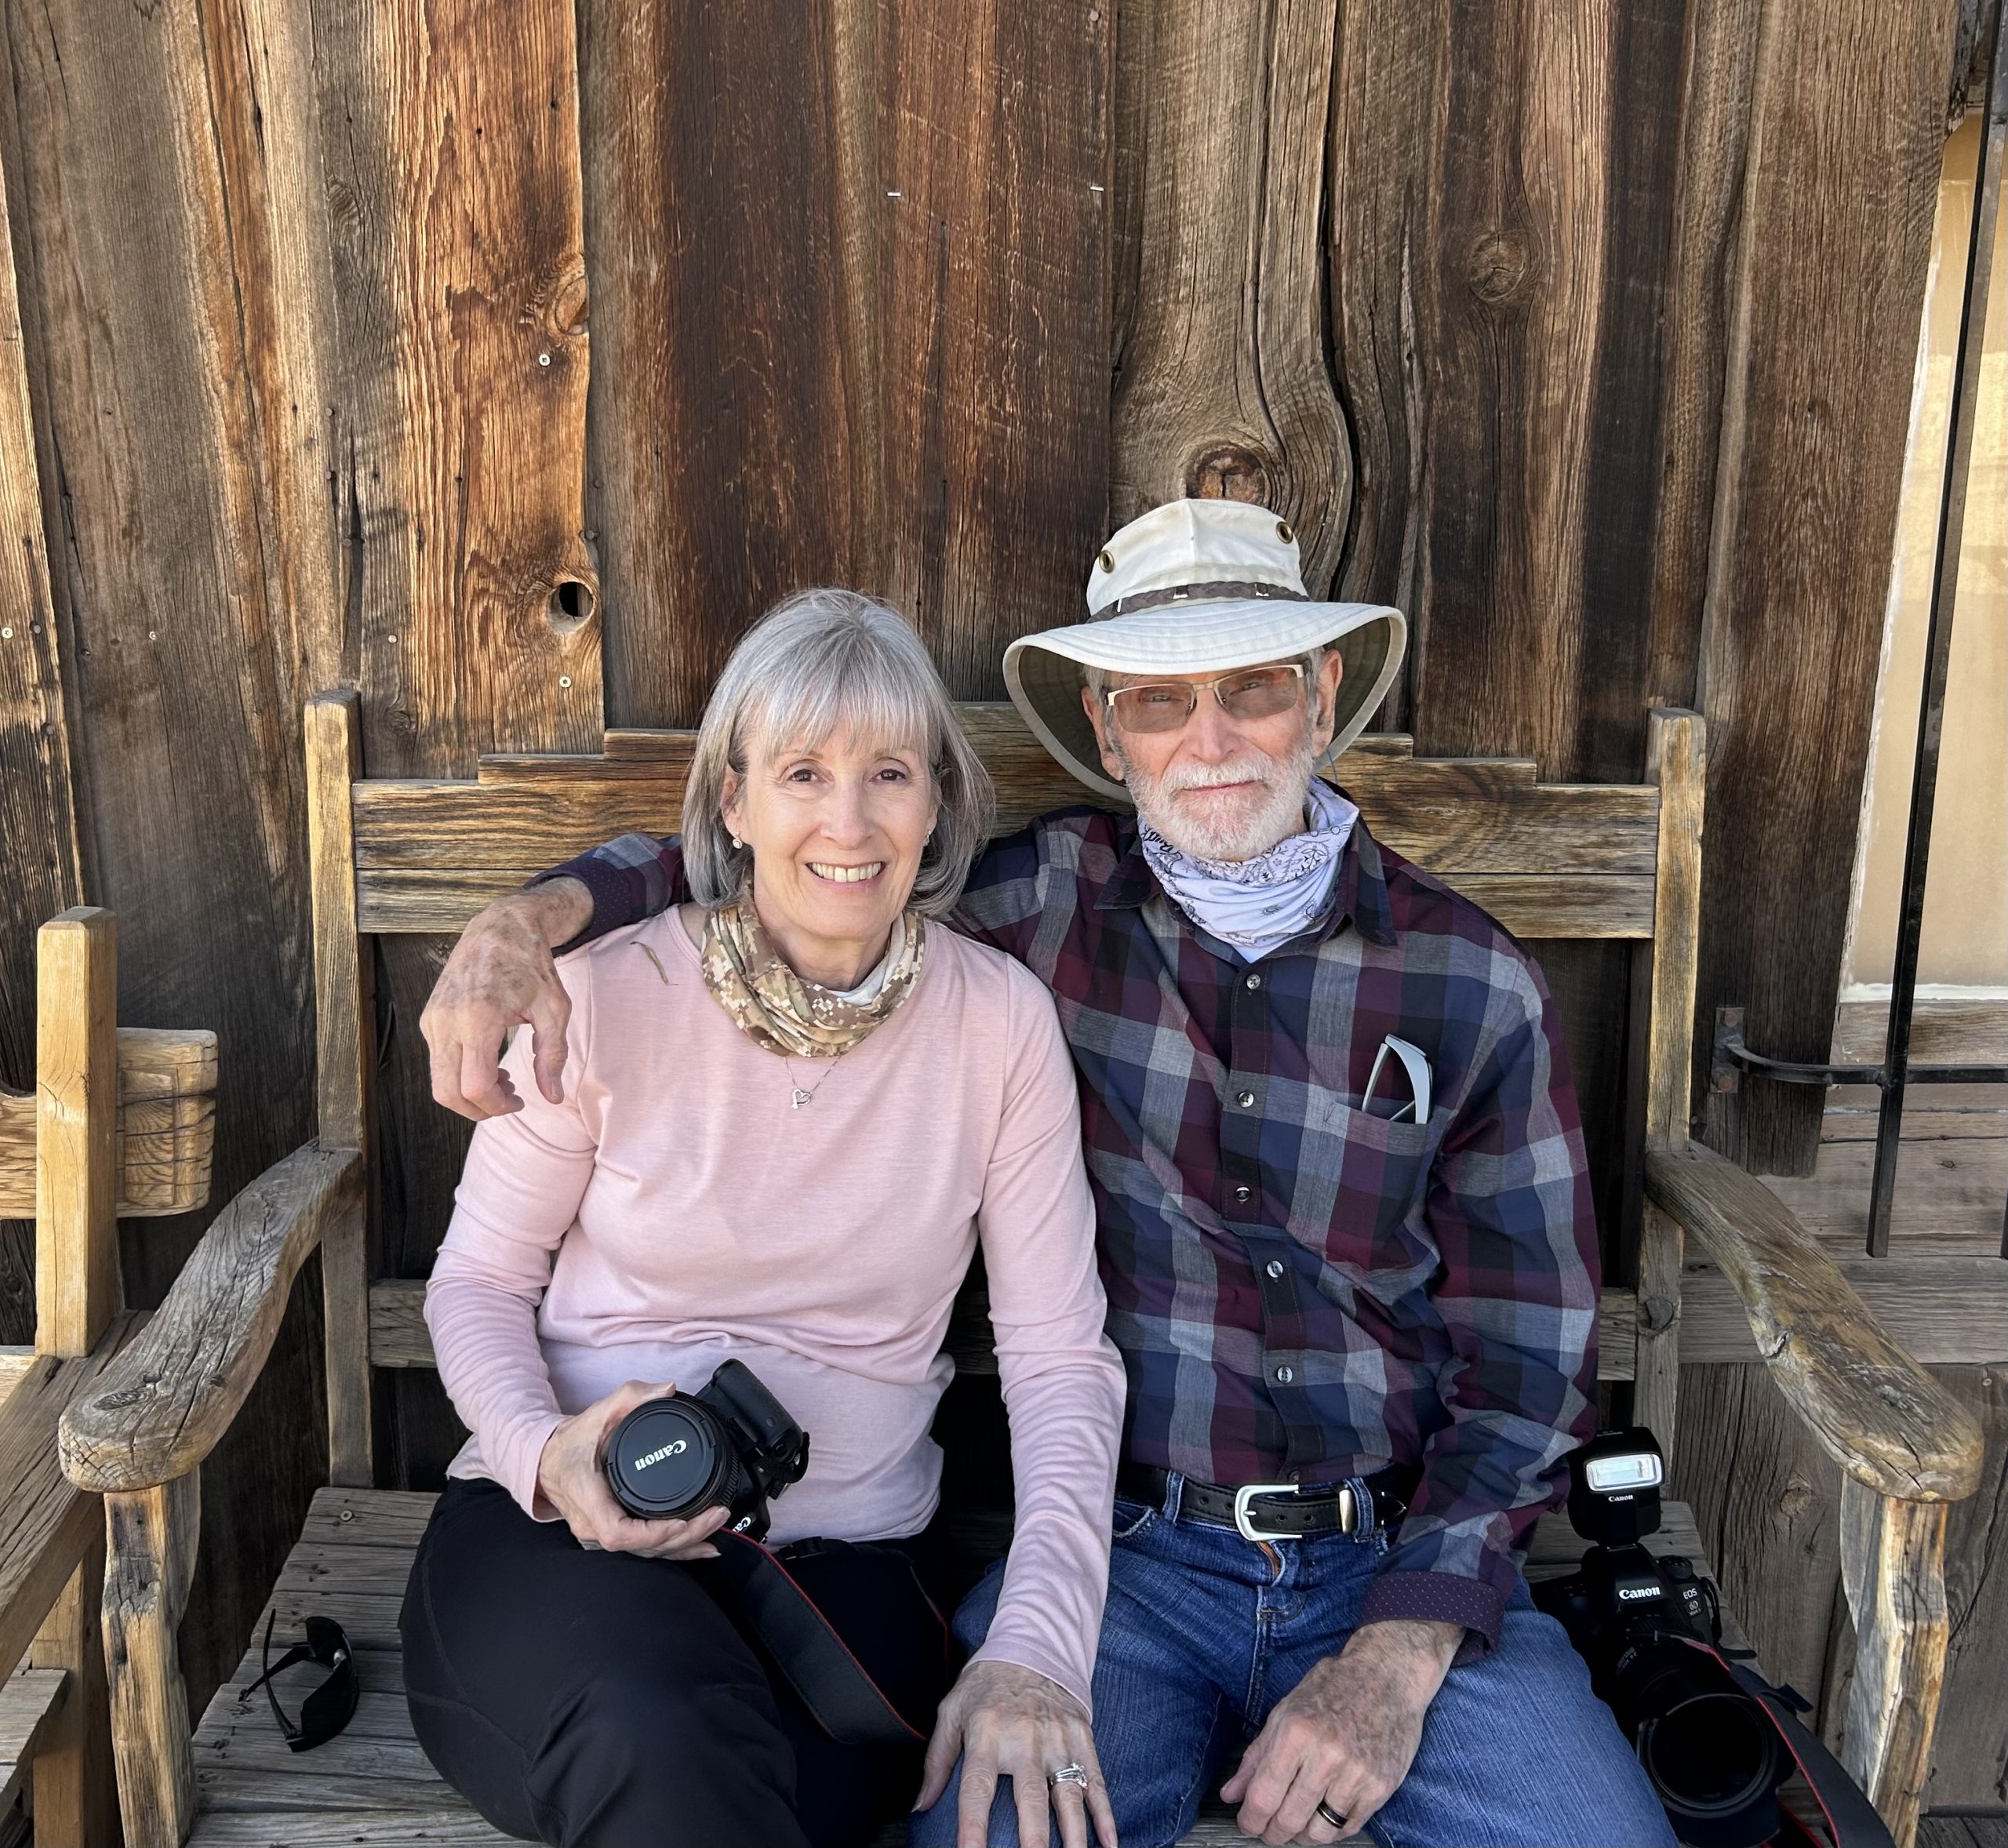 A man and woman are sitting and smiling on a wooden bench outside a rustic wooden building. The woman holds a camera, and the man wears a hat and bandana, with his arm around her shoulders. Both appear relaxed and content, dressed casually.